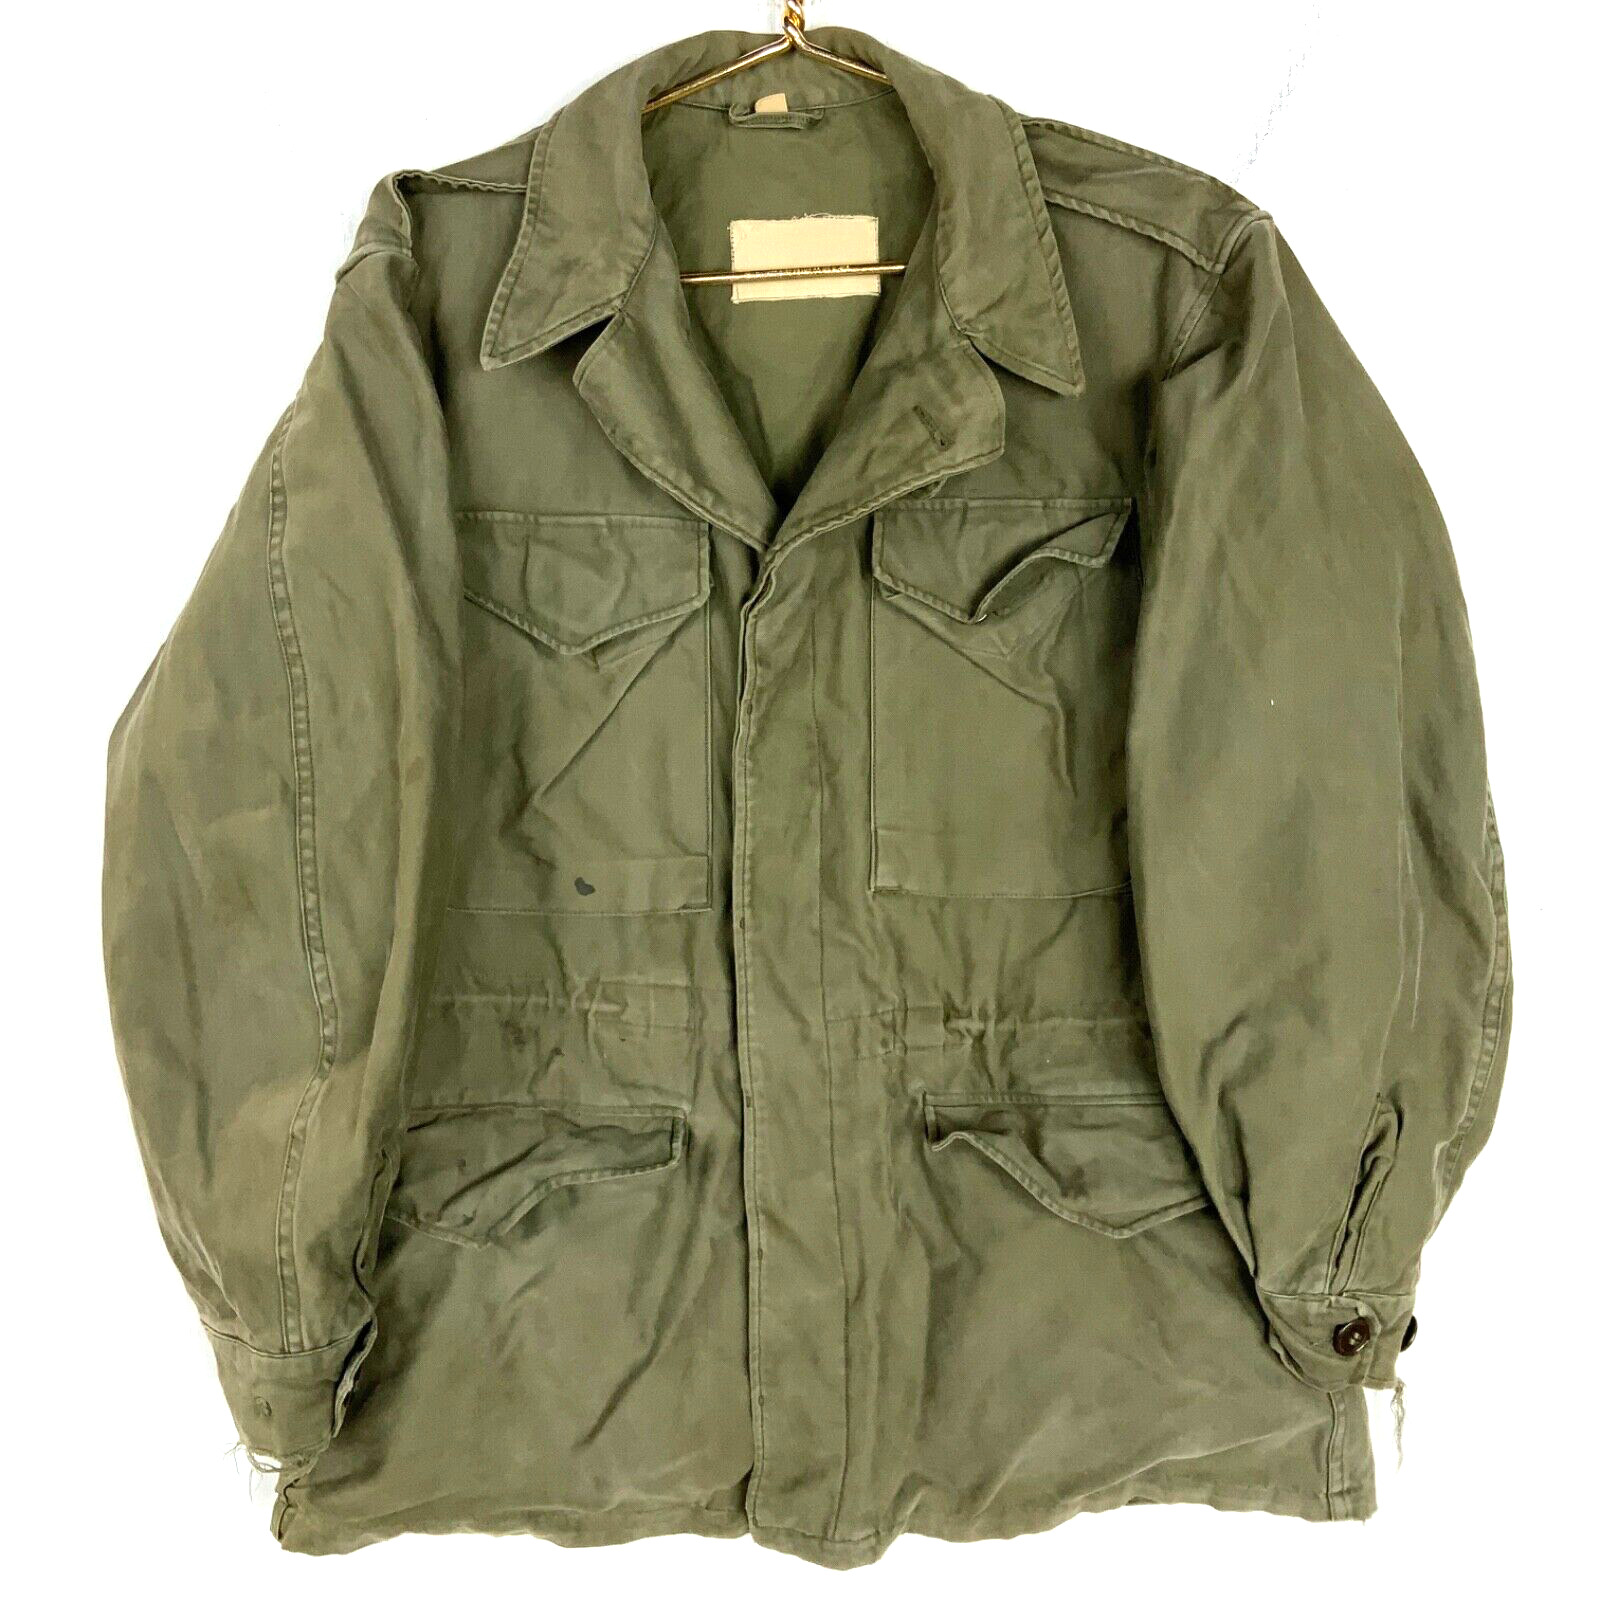 Vintage Us Military m-1943 Jacket Size 34 Small Green